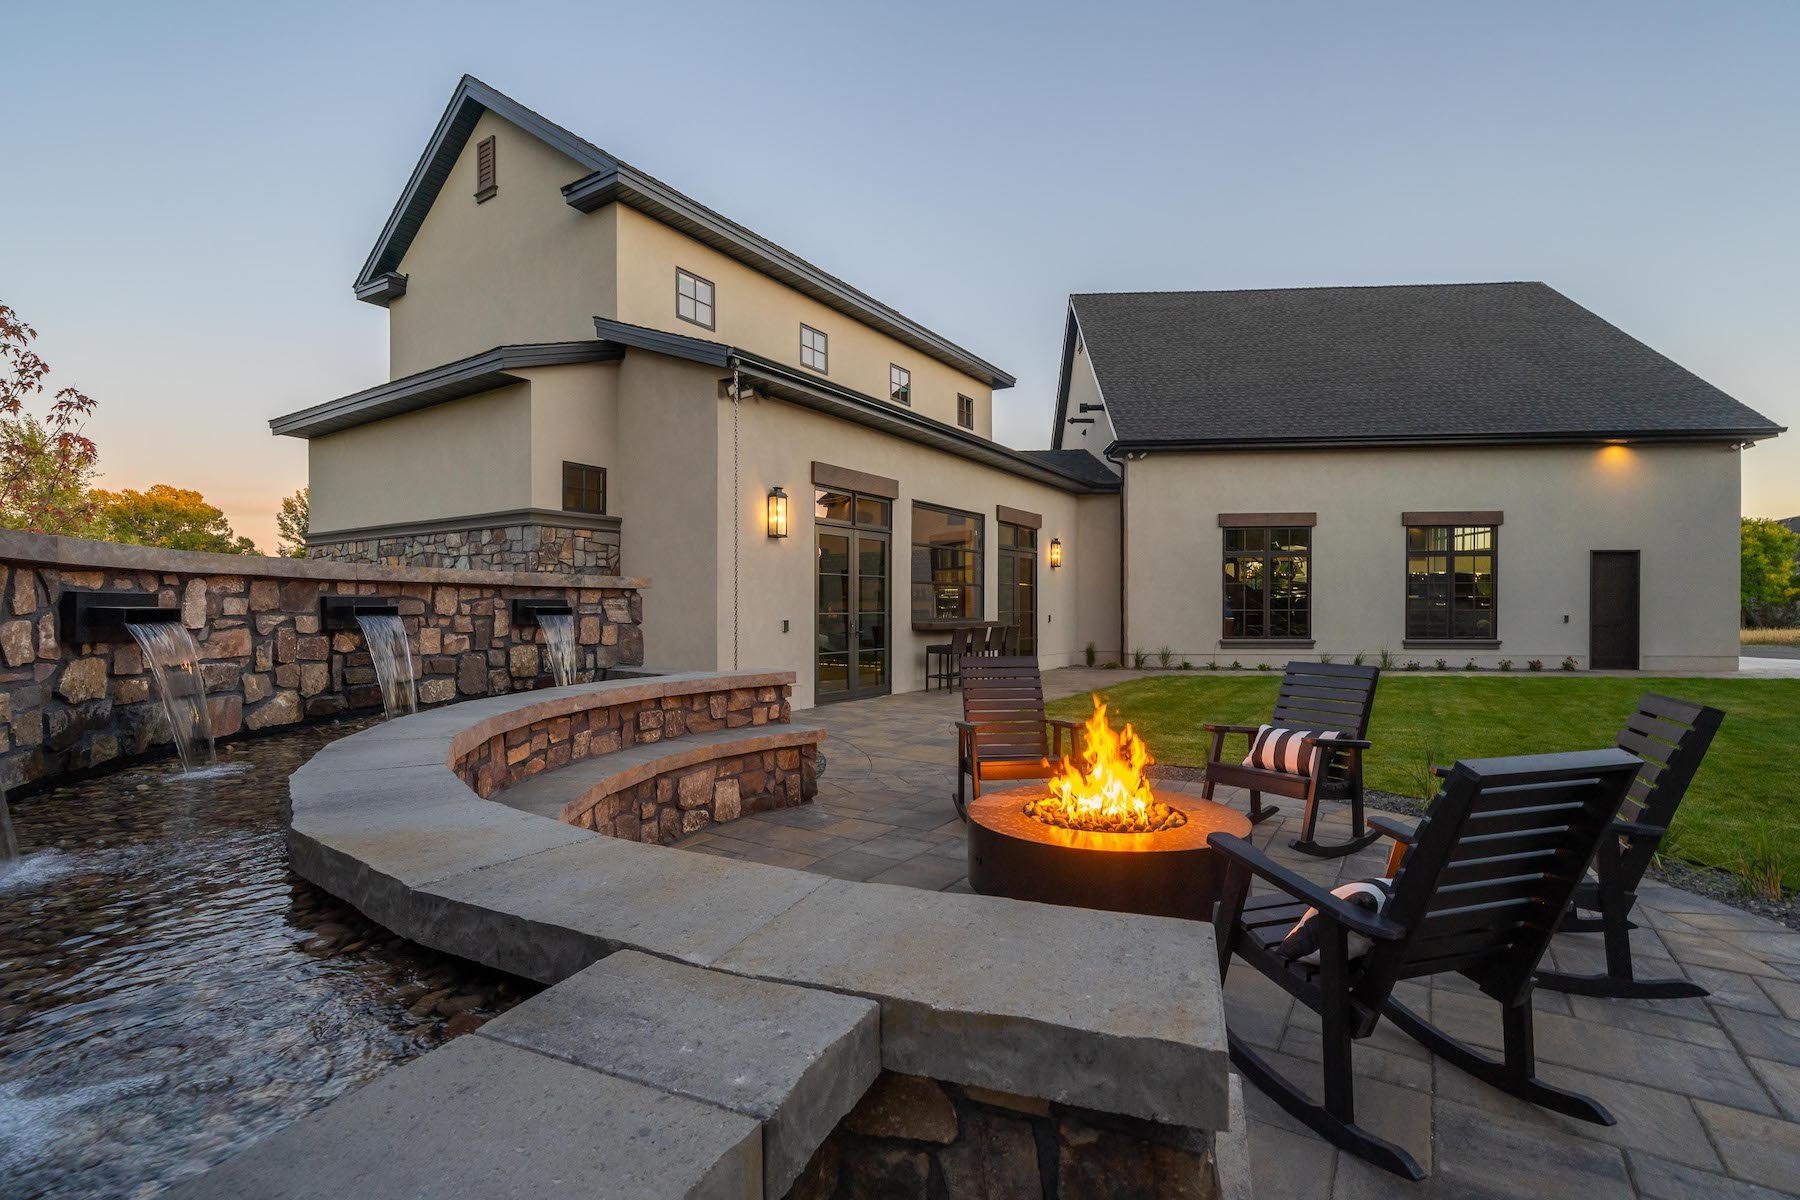 Fire pit in backyard with water fountain